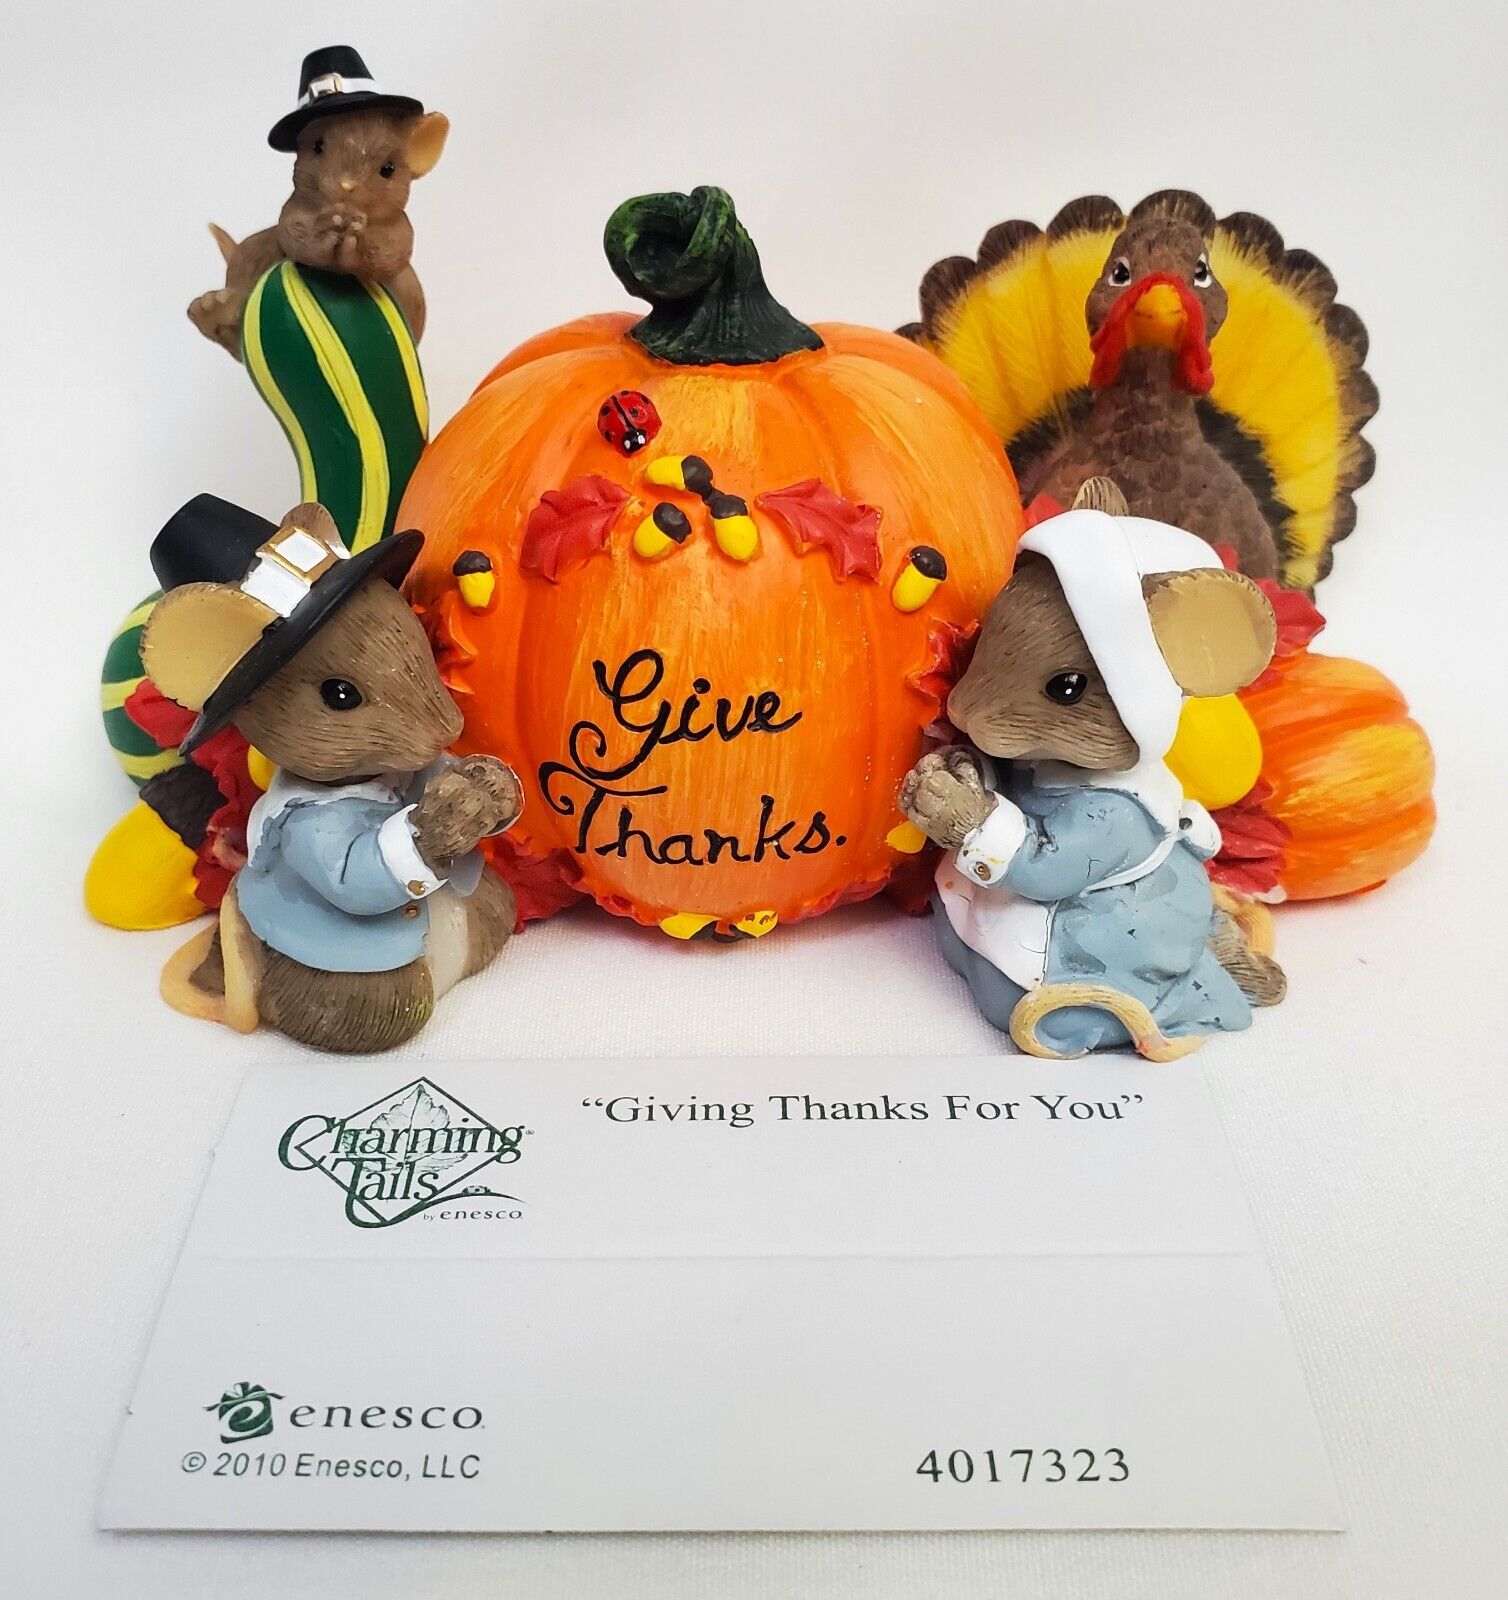 Charming Tails: Giving Thanks For You - 4017323 - *Rare* Pristine Condition